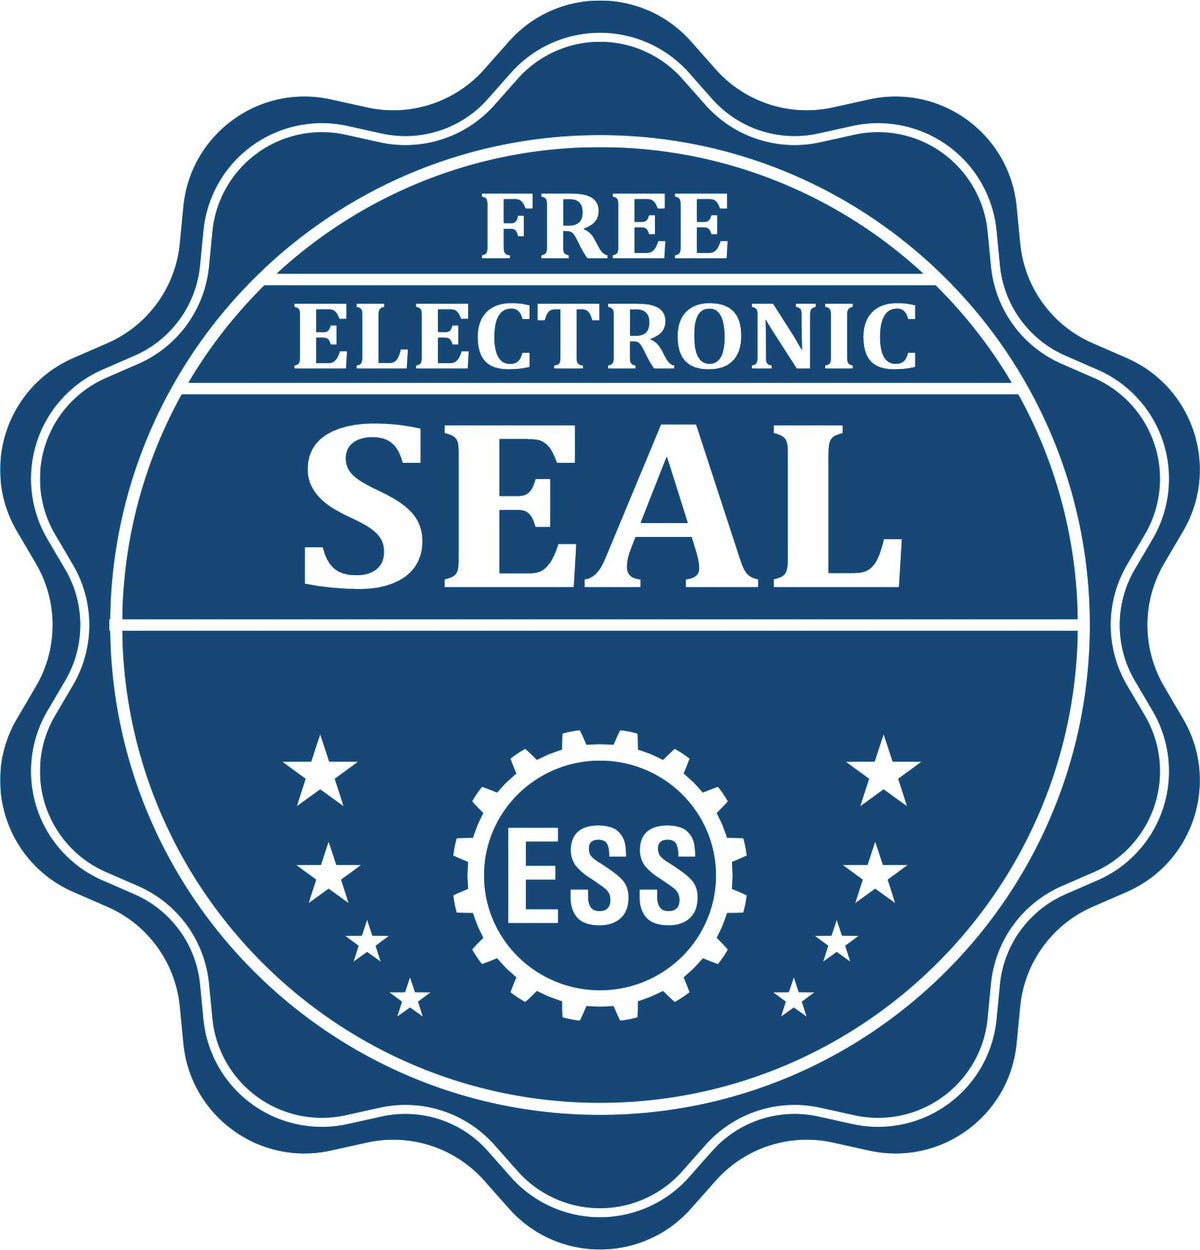 A badge showing a free electronic seal for the Slim Pre-Inked Montana Professional Geologist Seal Stamp with stars and the ESS gear on the emblem.